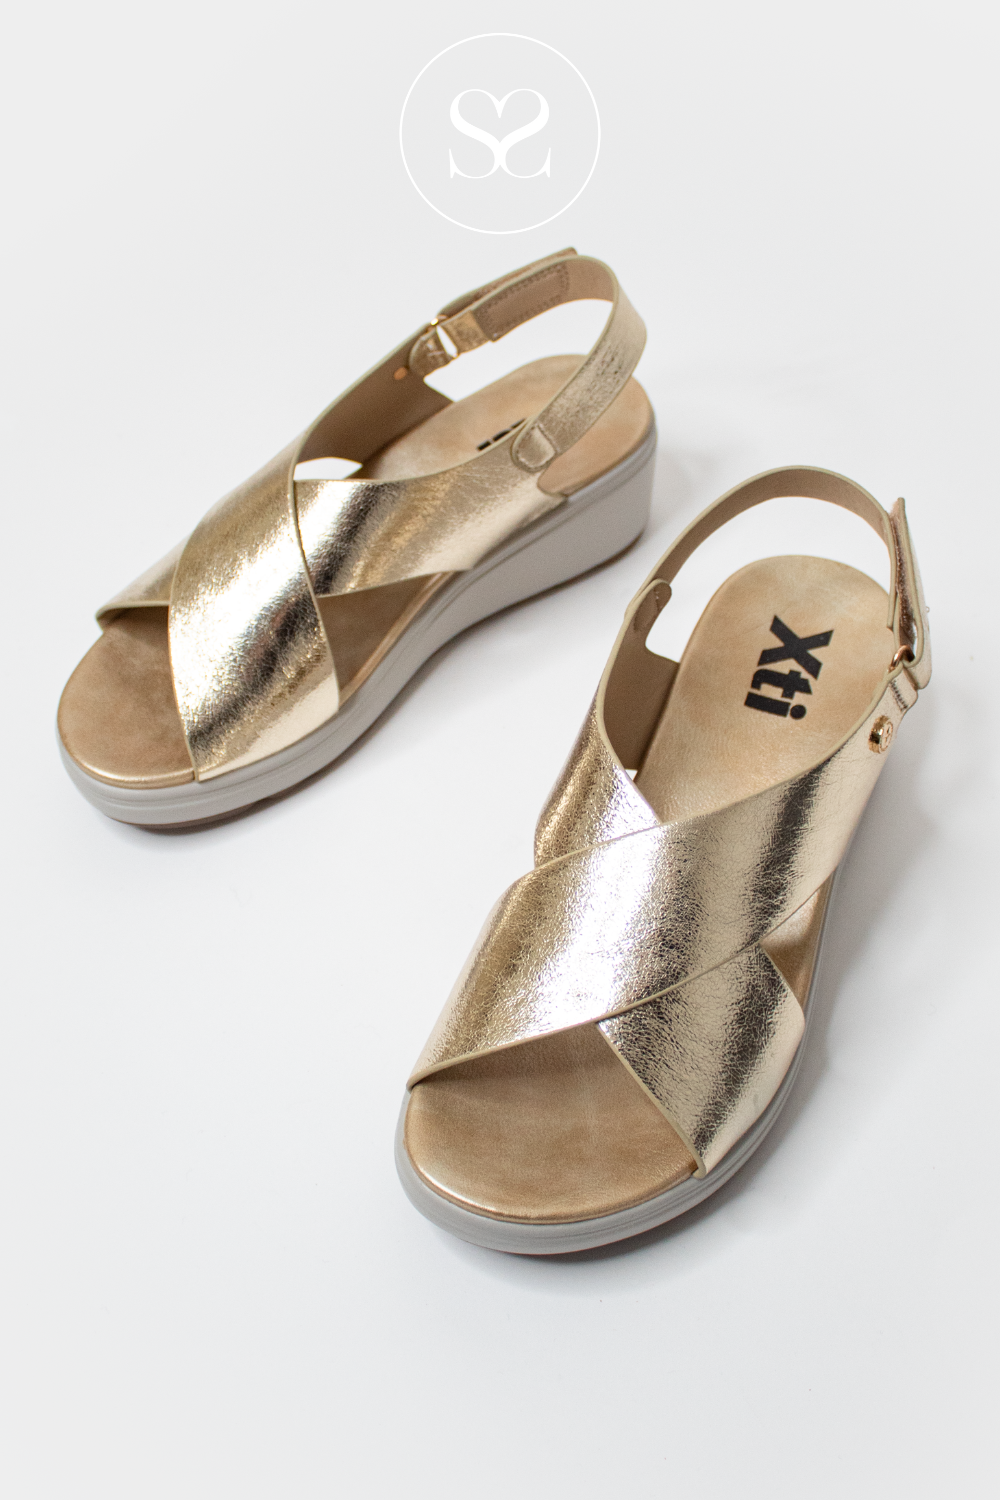 XTI 142700 GOLD WEDGE CROSS STRAP SANDALS WITH SLINGBACK VELCRO STRAP